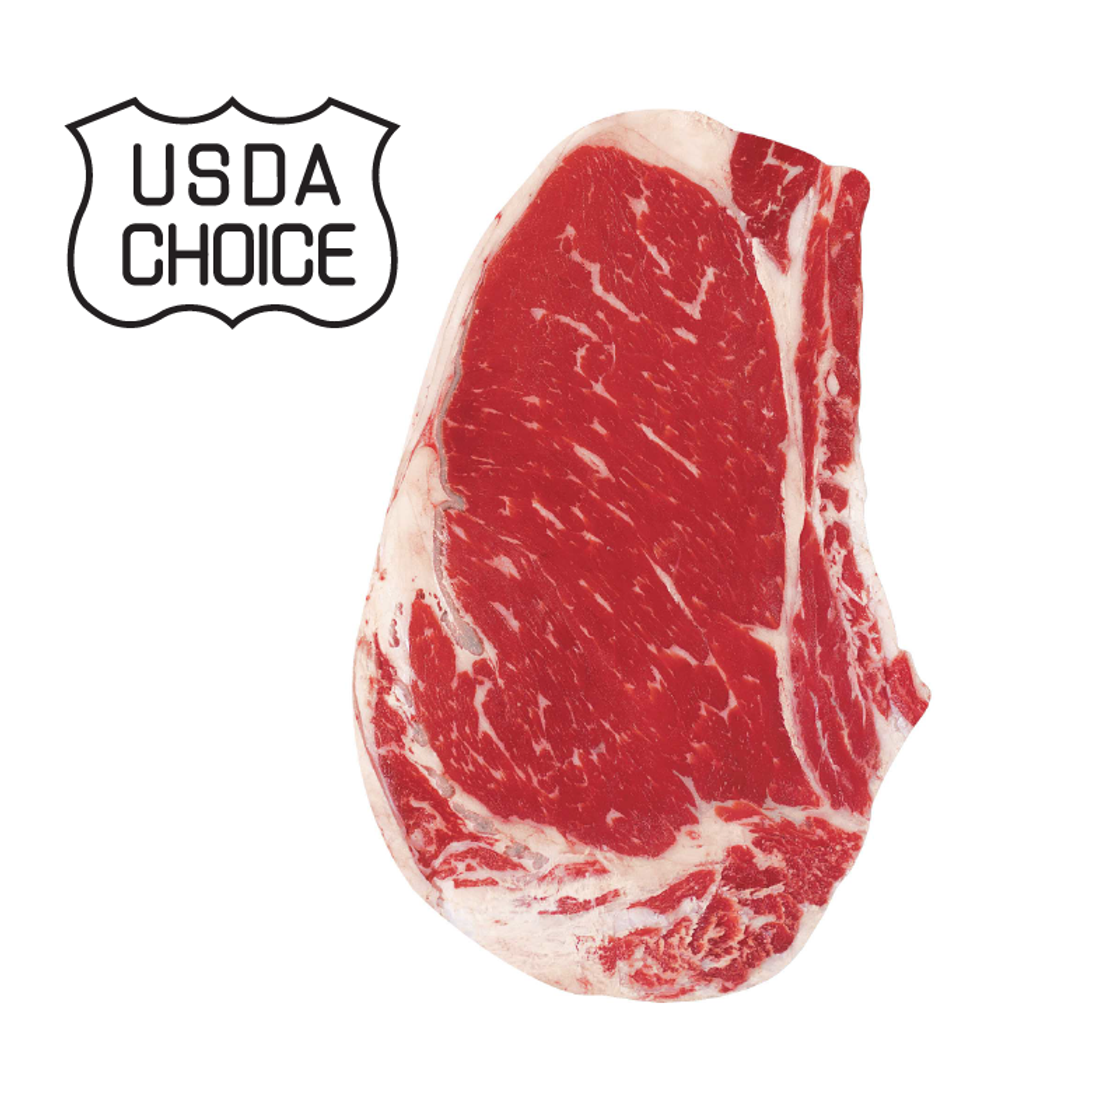 Beef Choices